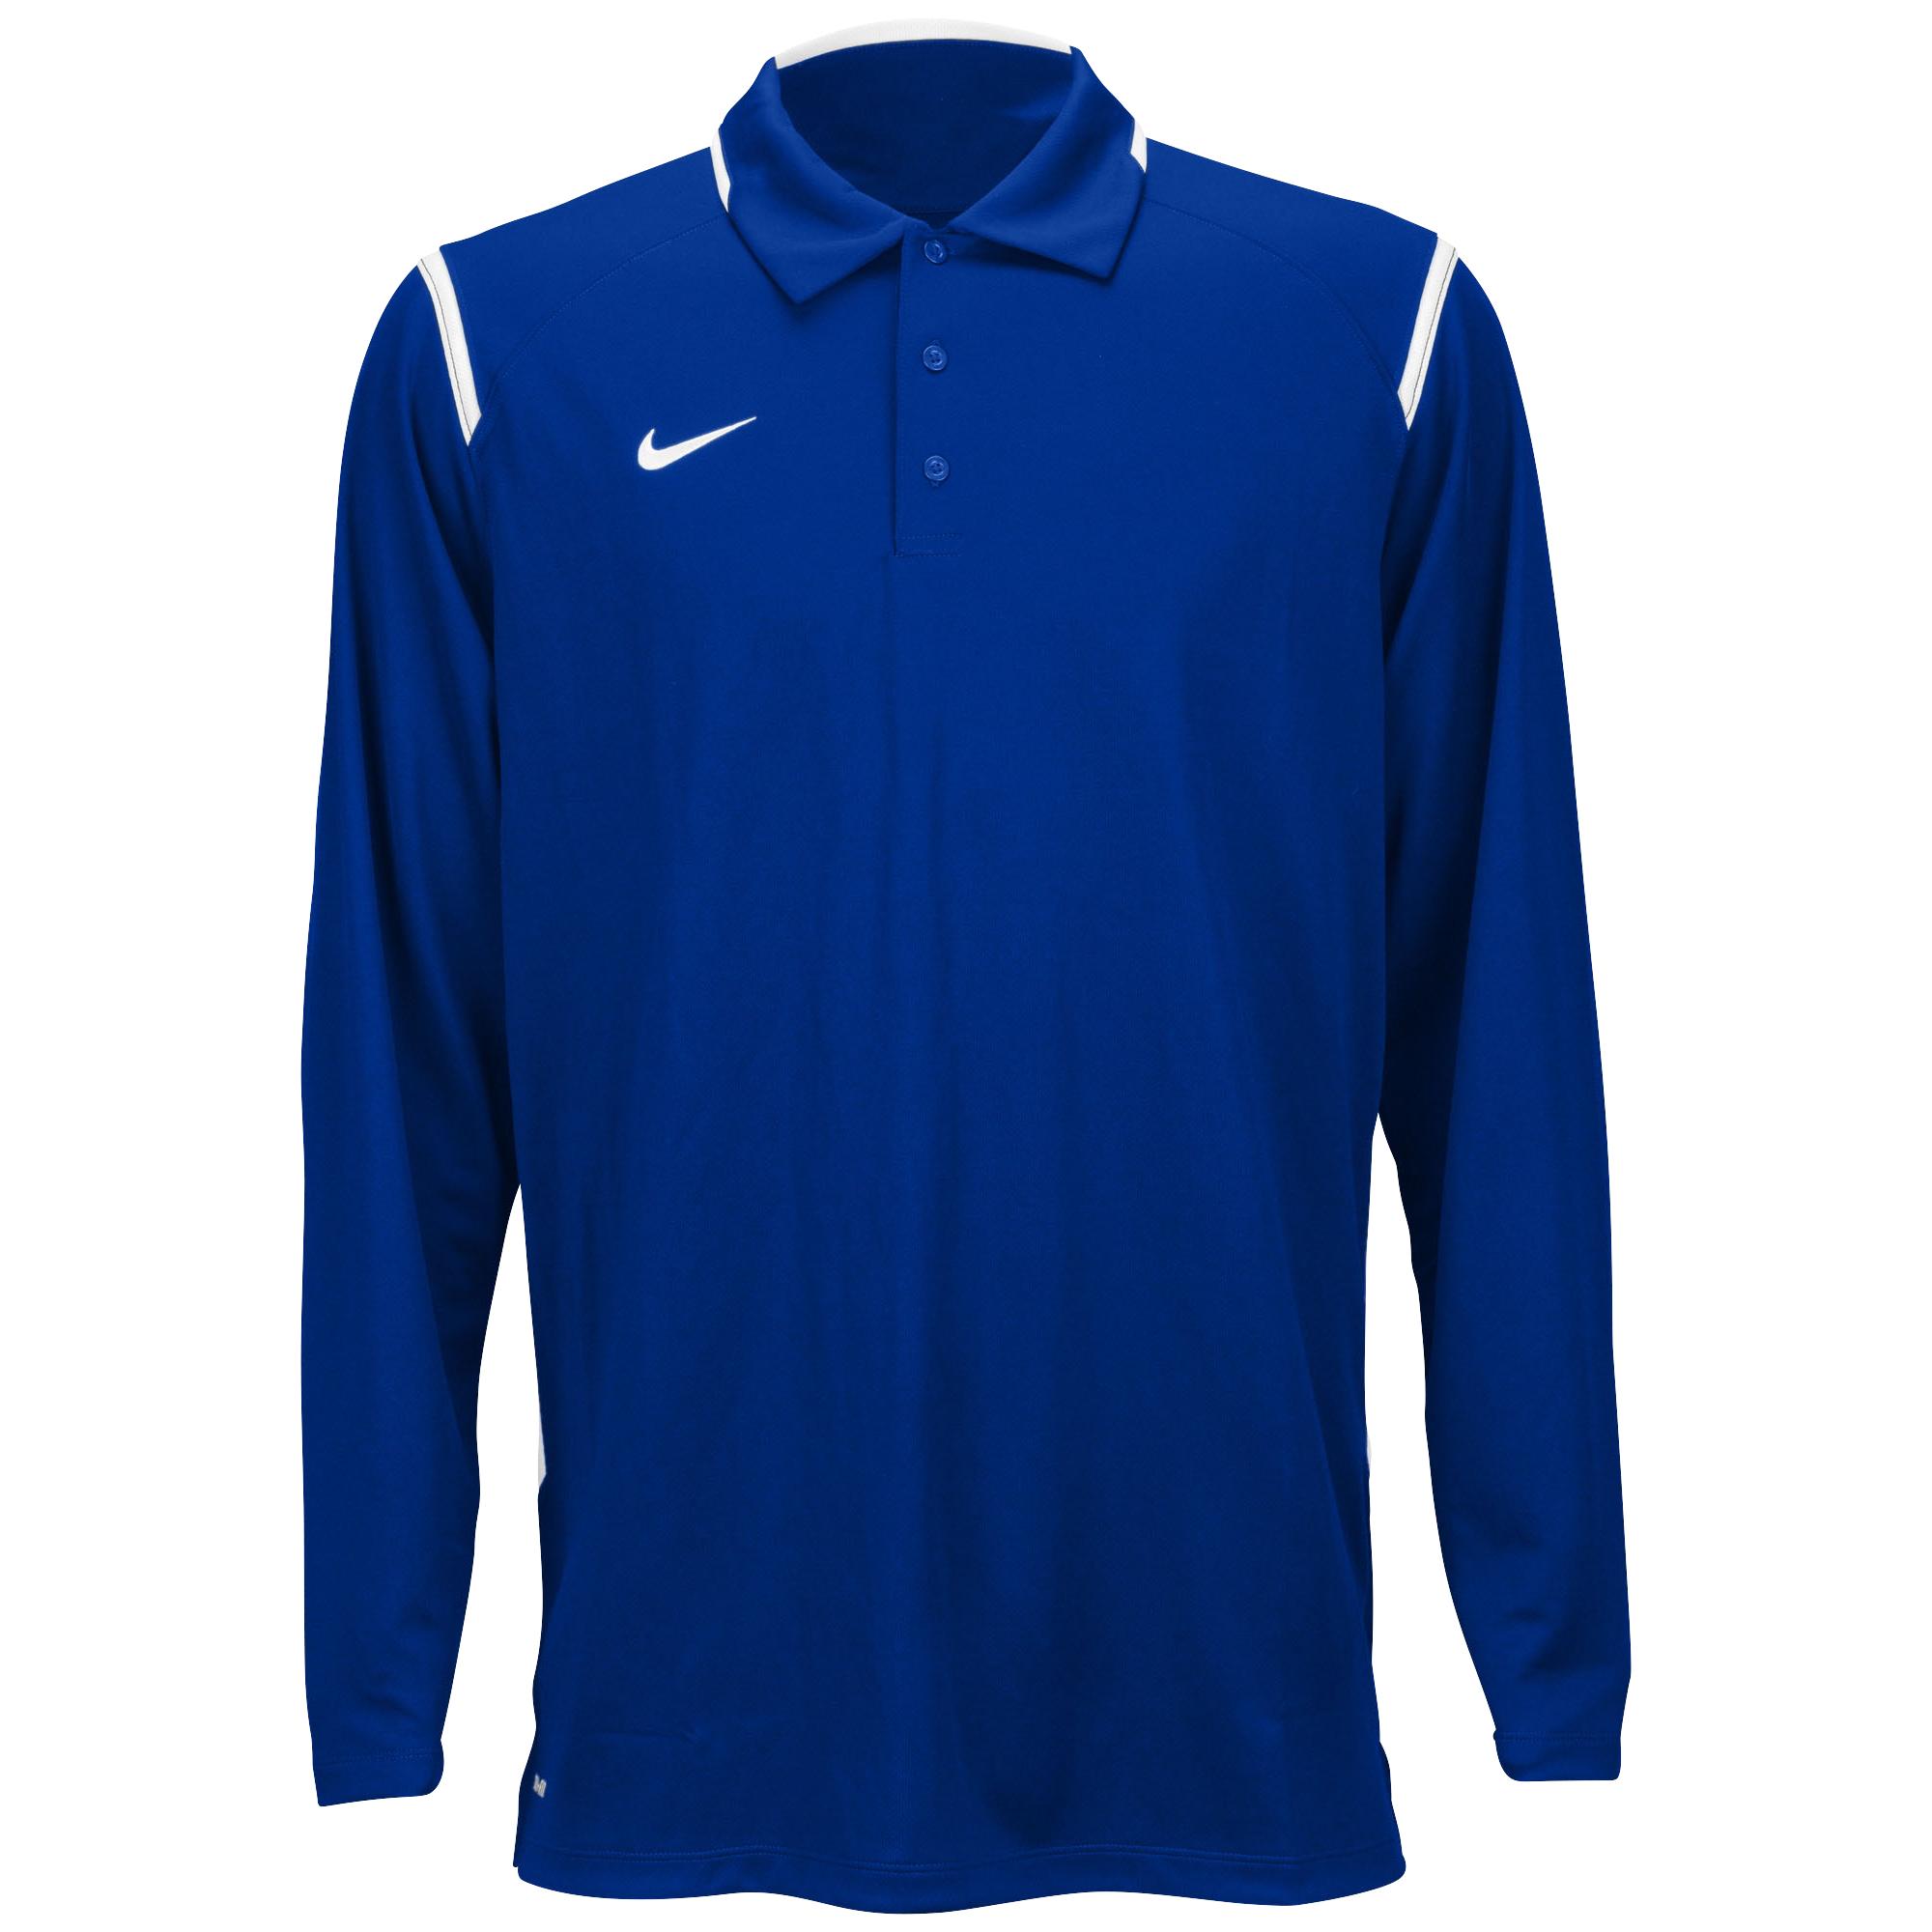 Nike Synthetic Team Gameday Polo Shirt Long Sleeve in Blue for Men - Lyst